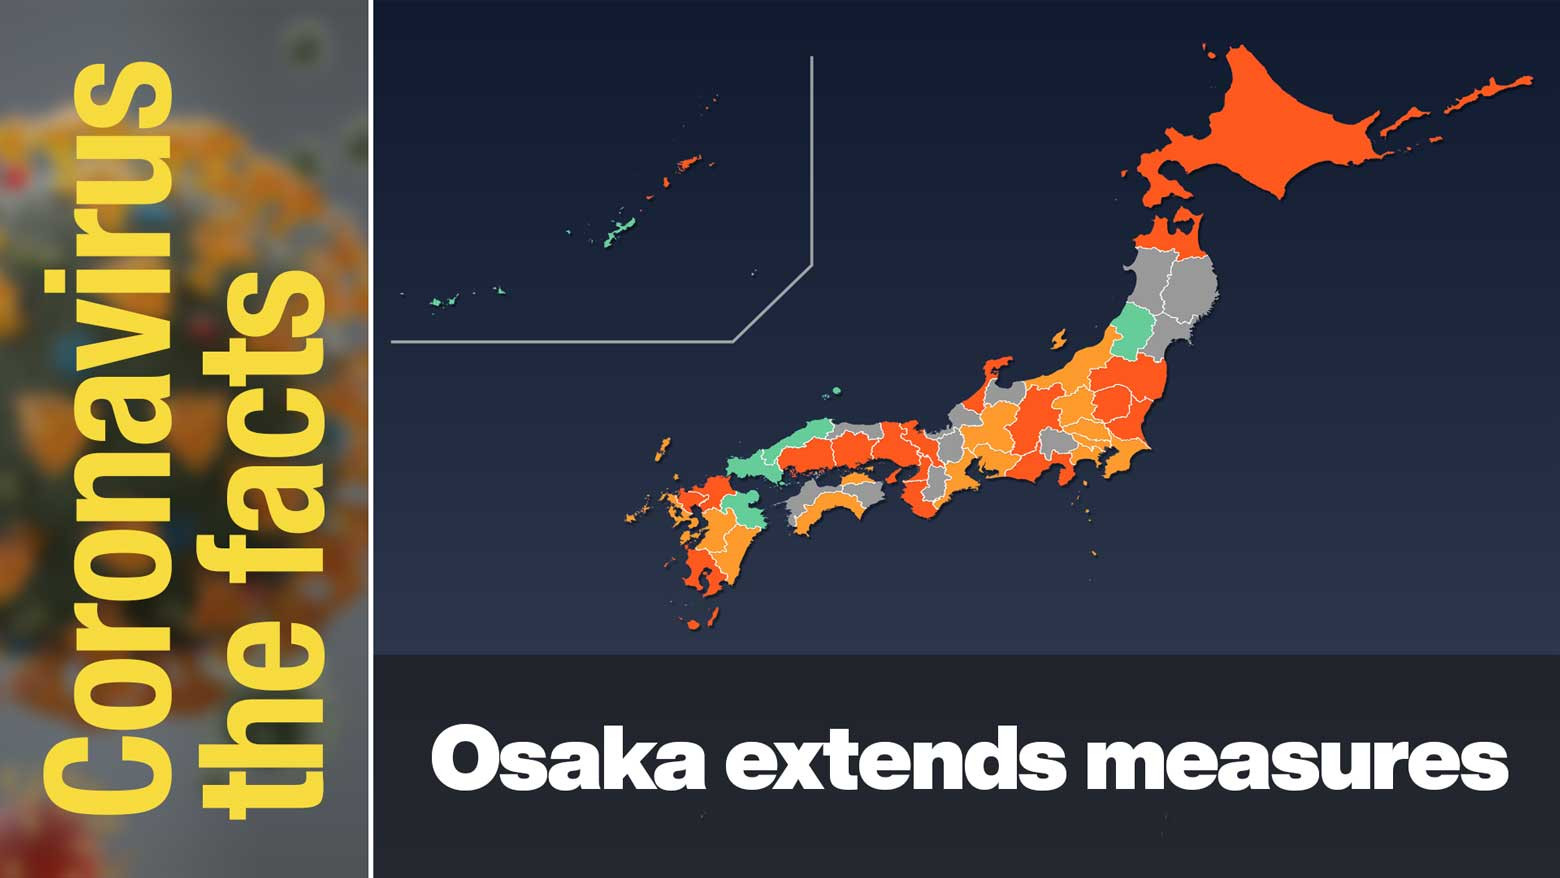 Restrictions extended in Osaka and 16 other prefectures